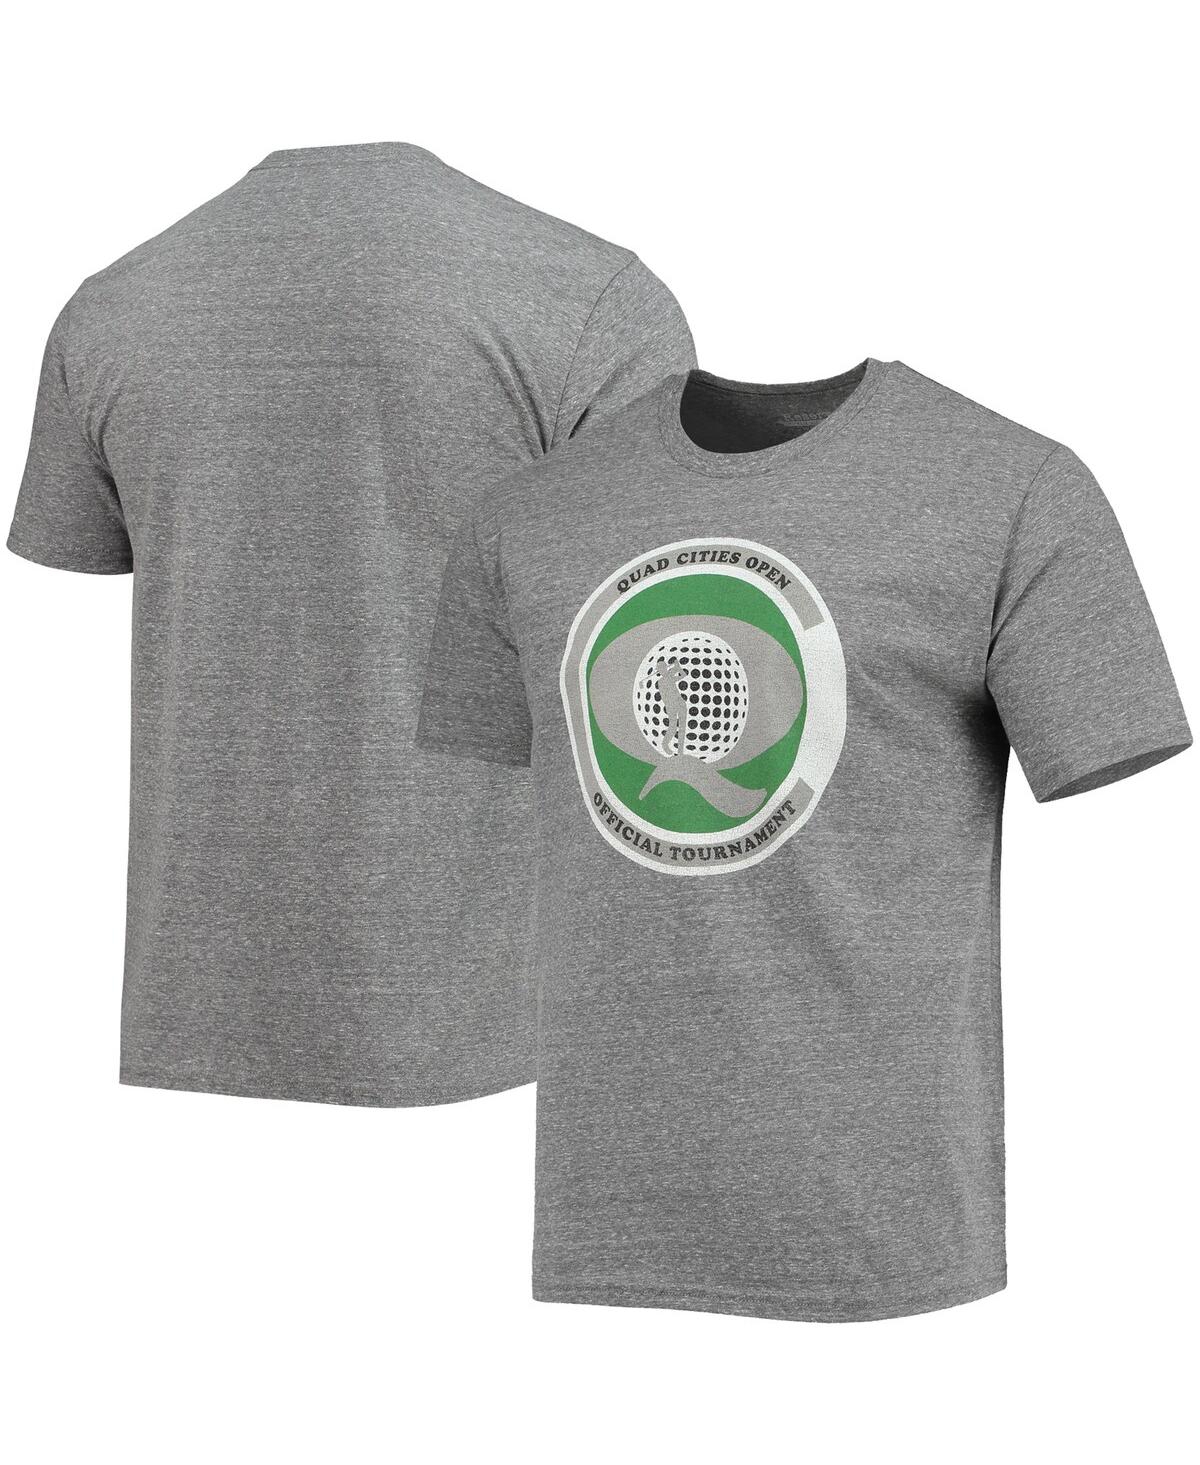 Men's Blue 84 Heathered Gray John Deere Classic Heritage Collection Quad Cities Open Tri-Blend T-shirt - Heathered Gray